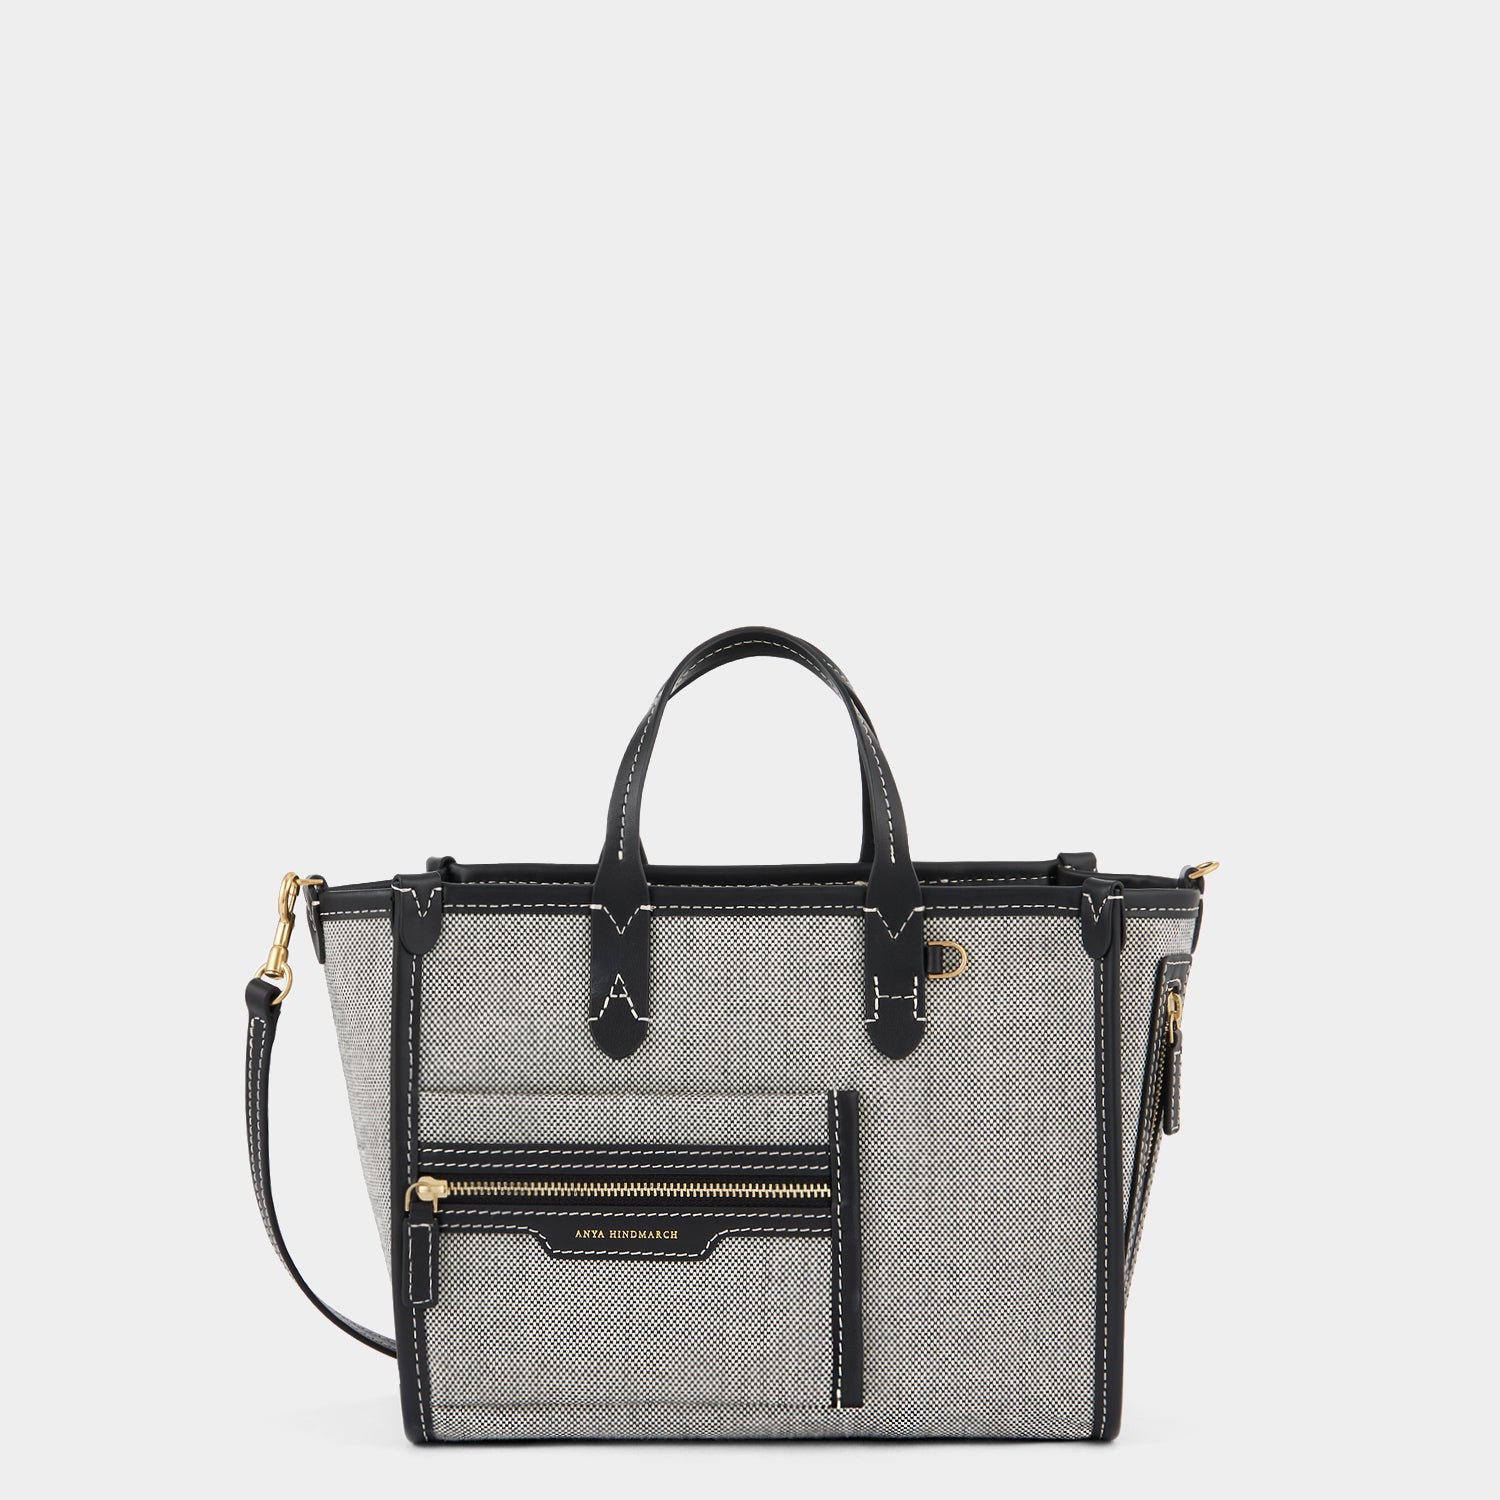 XS ポケット トート -

                  
                    Mixed Canvas in Salt and Pepper -
                  

                  Anya Hindmarch JP
